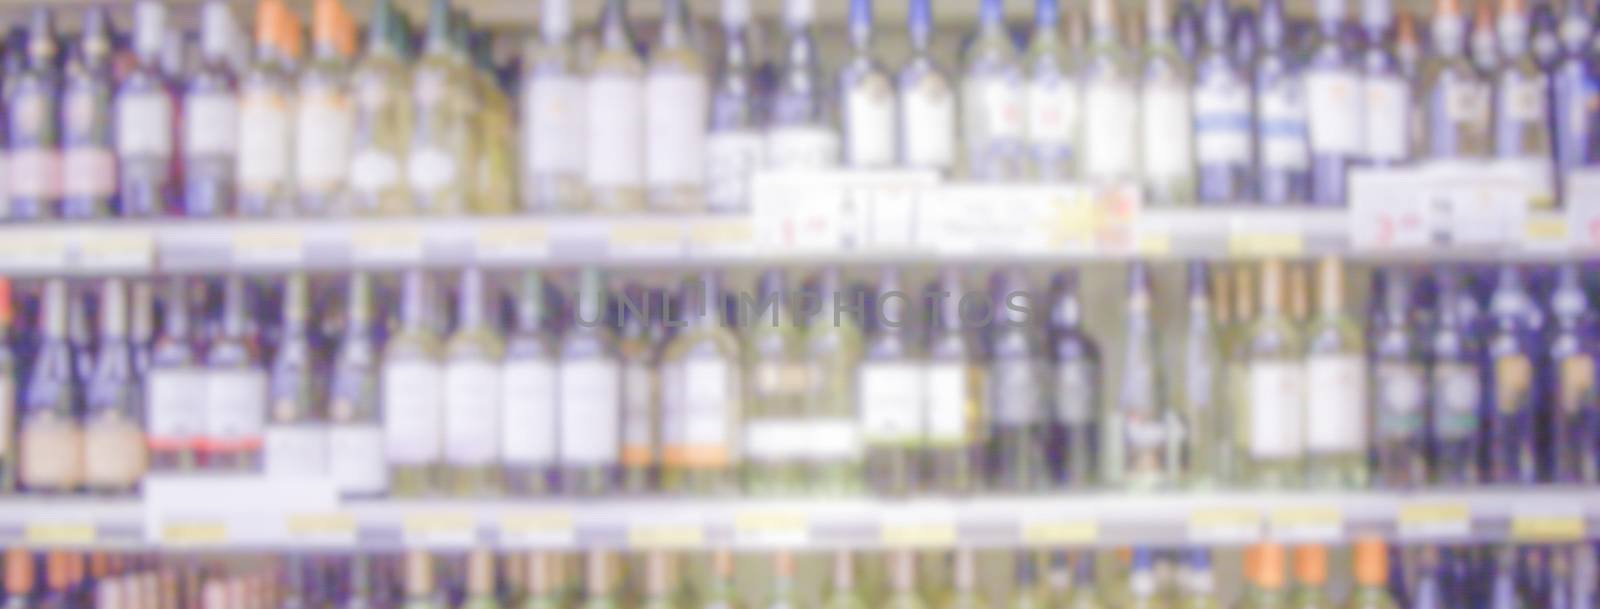 Defocused background of shelves with wine bottles in a supermark by marcorubino